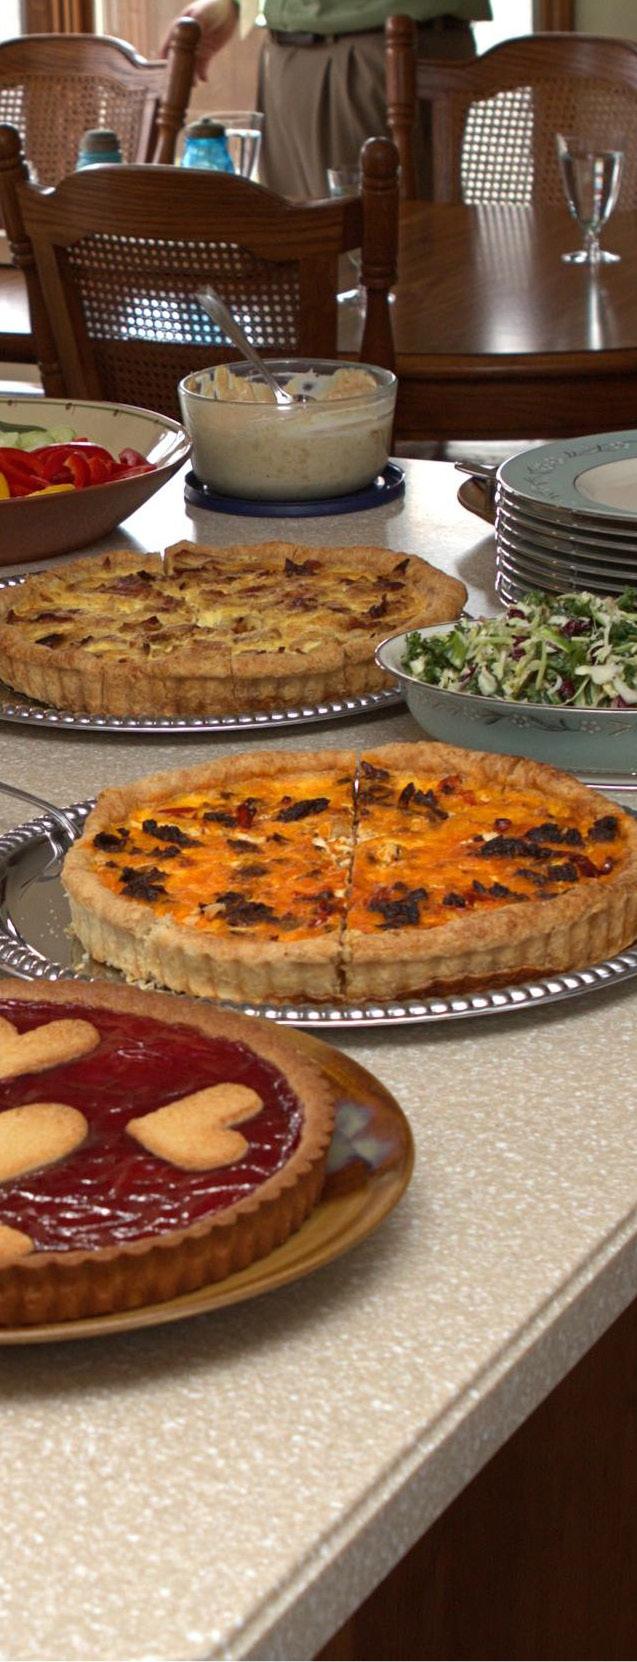 BREAKFAST & BRUNCH HOMEMADE QUICHE Serves 6-8 Lorraine $40 Bacon and cheese Denver $40 Bell peppers, onion, ham, and cheddar Provencal $40 Zucchini, tomatoes, and basil Three Cheese $40 Cheddar,